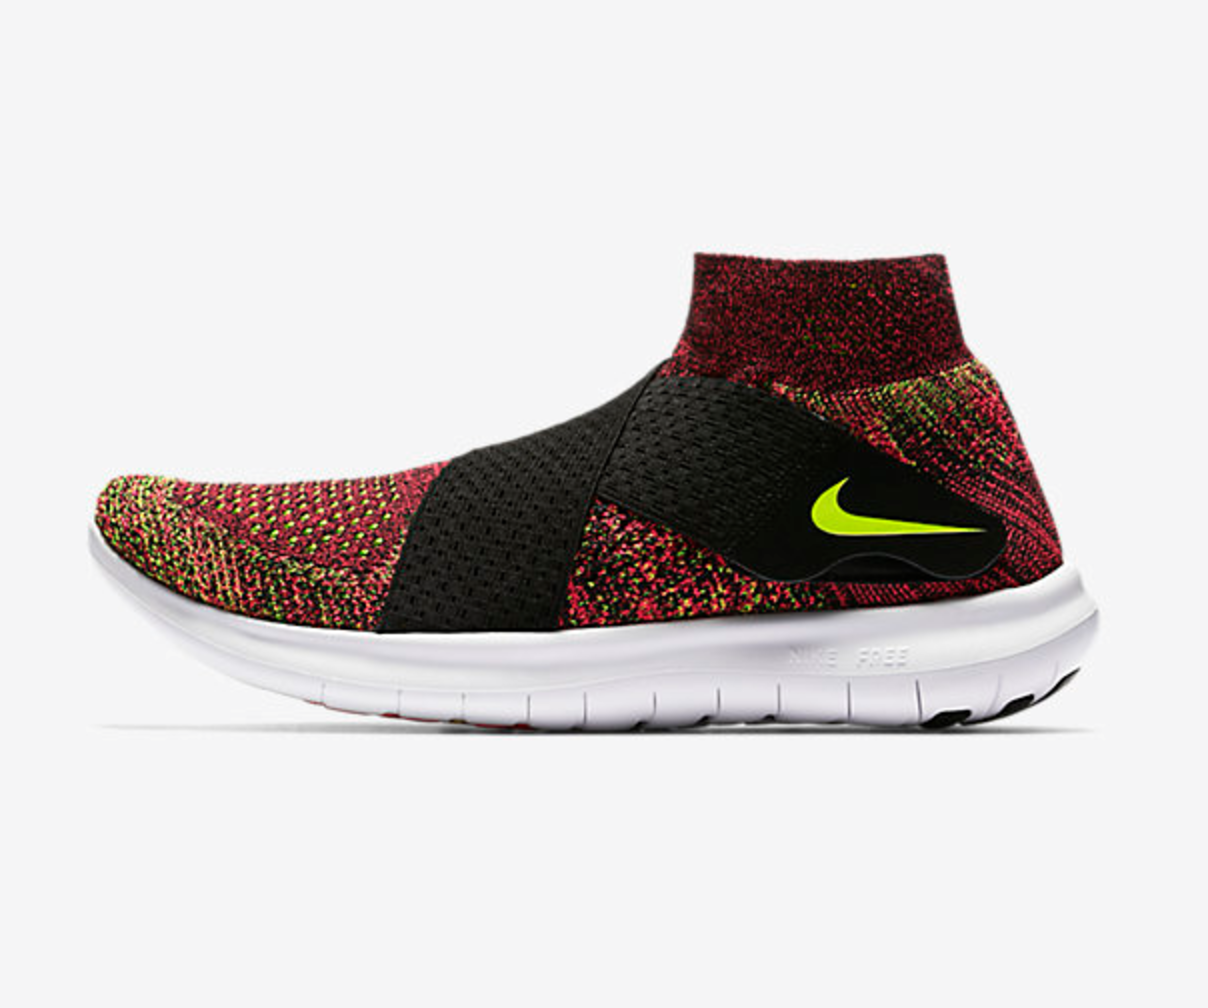 Nike Free RN Motion Flyknit Running Shoes